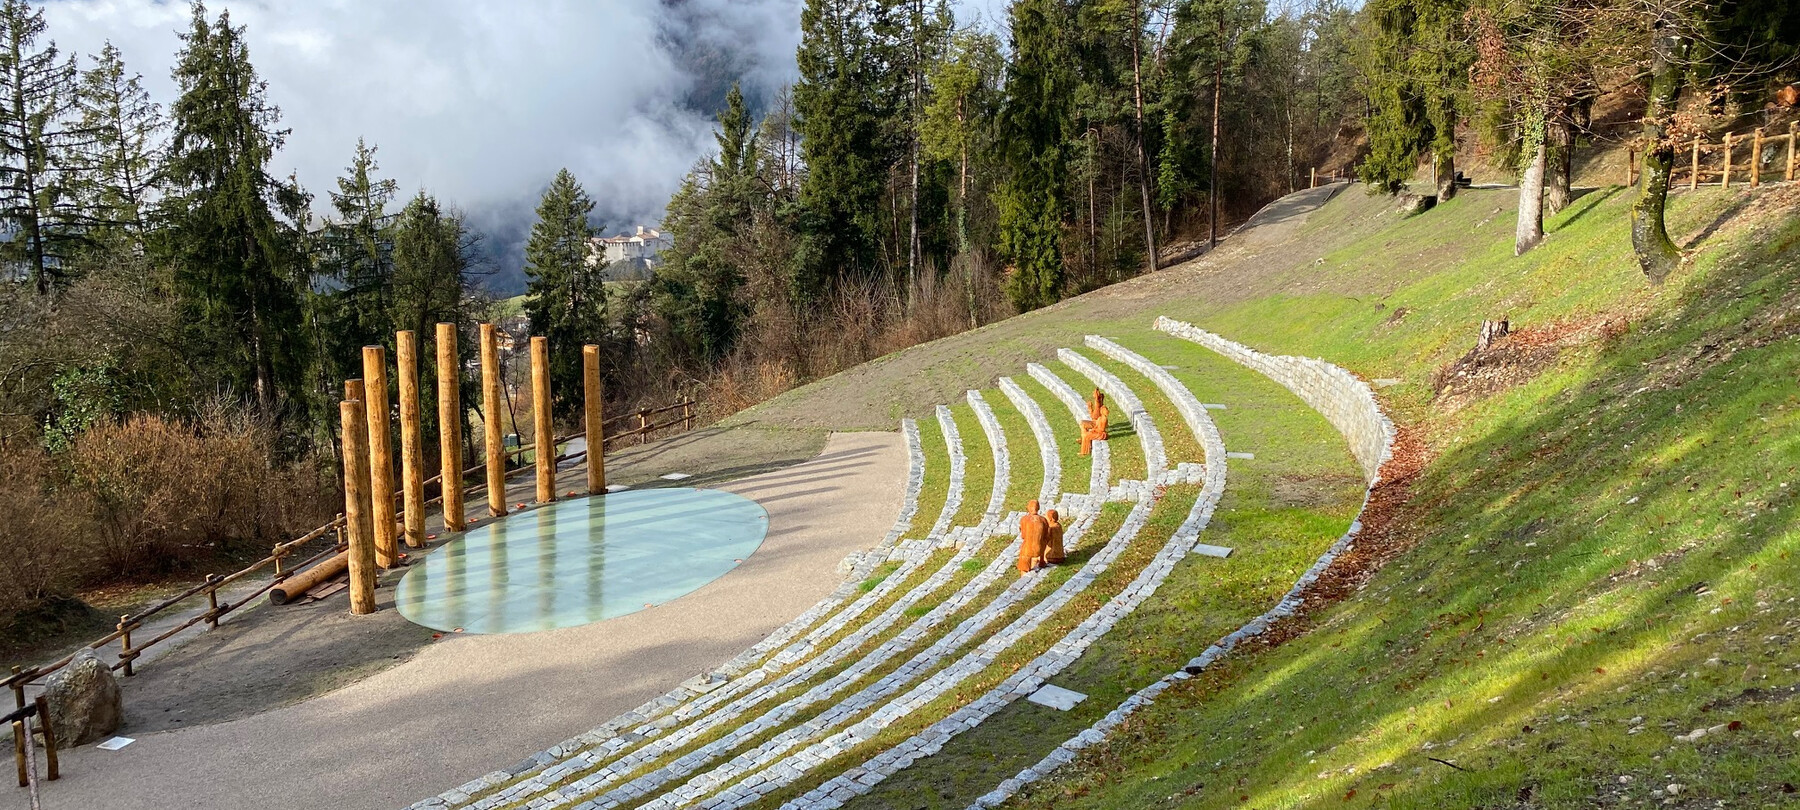 Art installation by Bosco Arte Stenico. A natural amphitheatre, in which stone steps follow the slope of the mountain. On the steps are four human figures, seated two by two. They are wooden statues, facing the arena of the amphitheatre, where there is a perfectly oval pool of water and, behind it, a fan of tall wooden columns. All around, pine, larch and beech trees. In the distance, white and grey clouds fill the sky and cover the mountain, which only peeps out occasionally where the clouds open up.